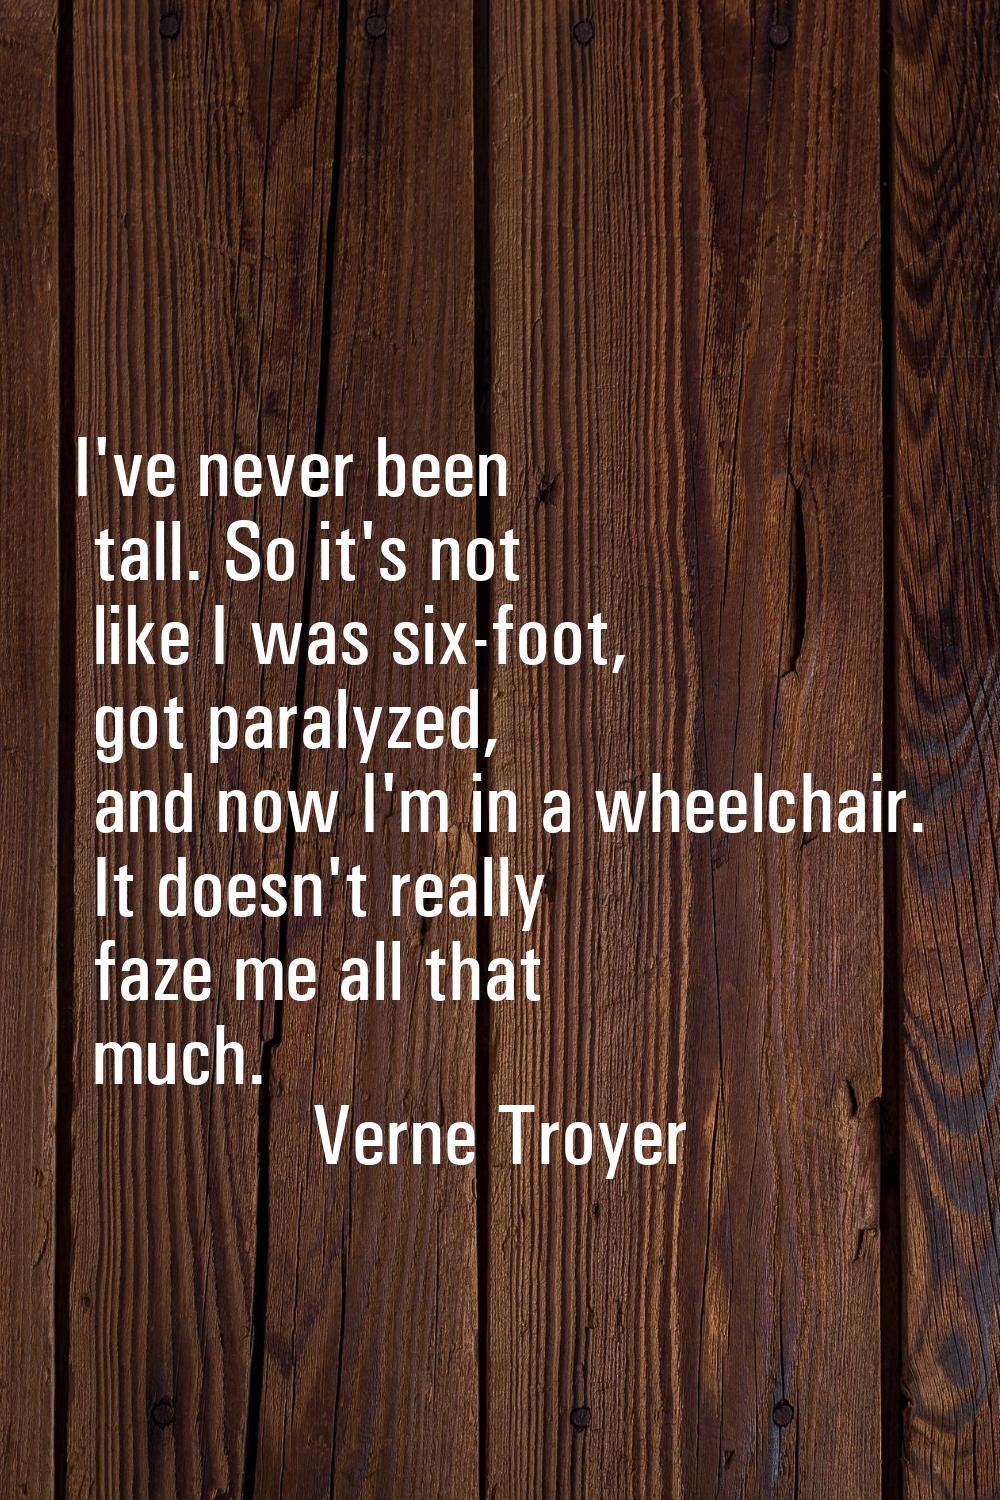 I've never been tall. So it's not like I was six-foot, got paralyzed, and now I'm in a wheelchair. 